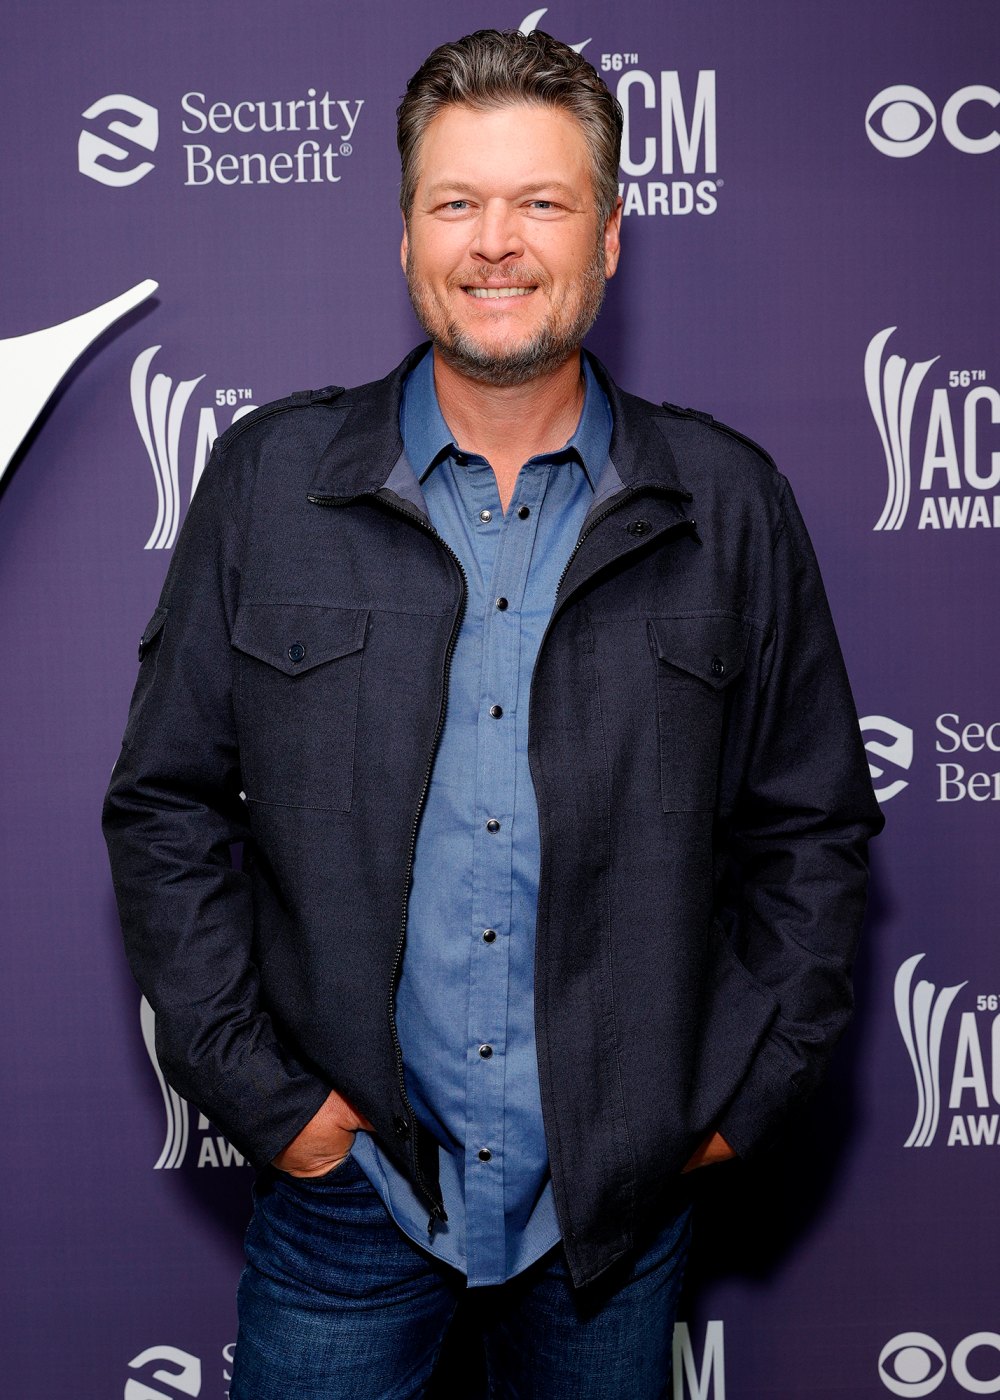 Blake Shelton Says He ‘Hasn’t Managed to Stop Drinking’ But Hopes to ‘Cut Back’ in the New Year